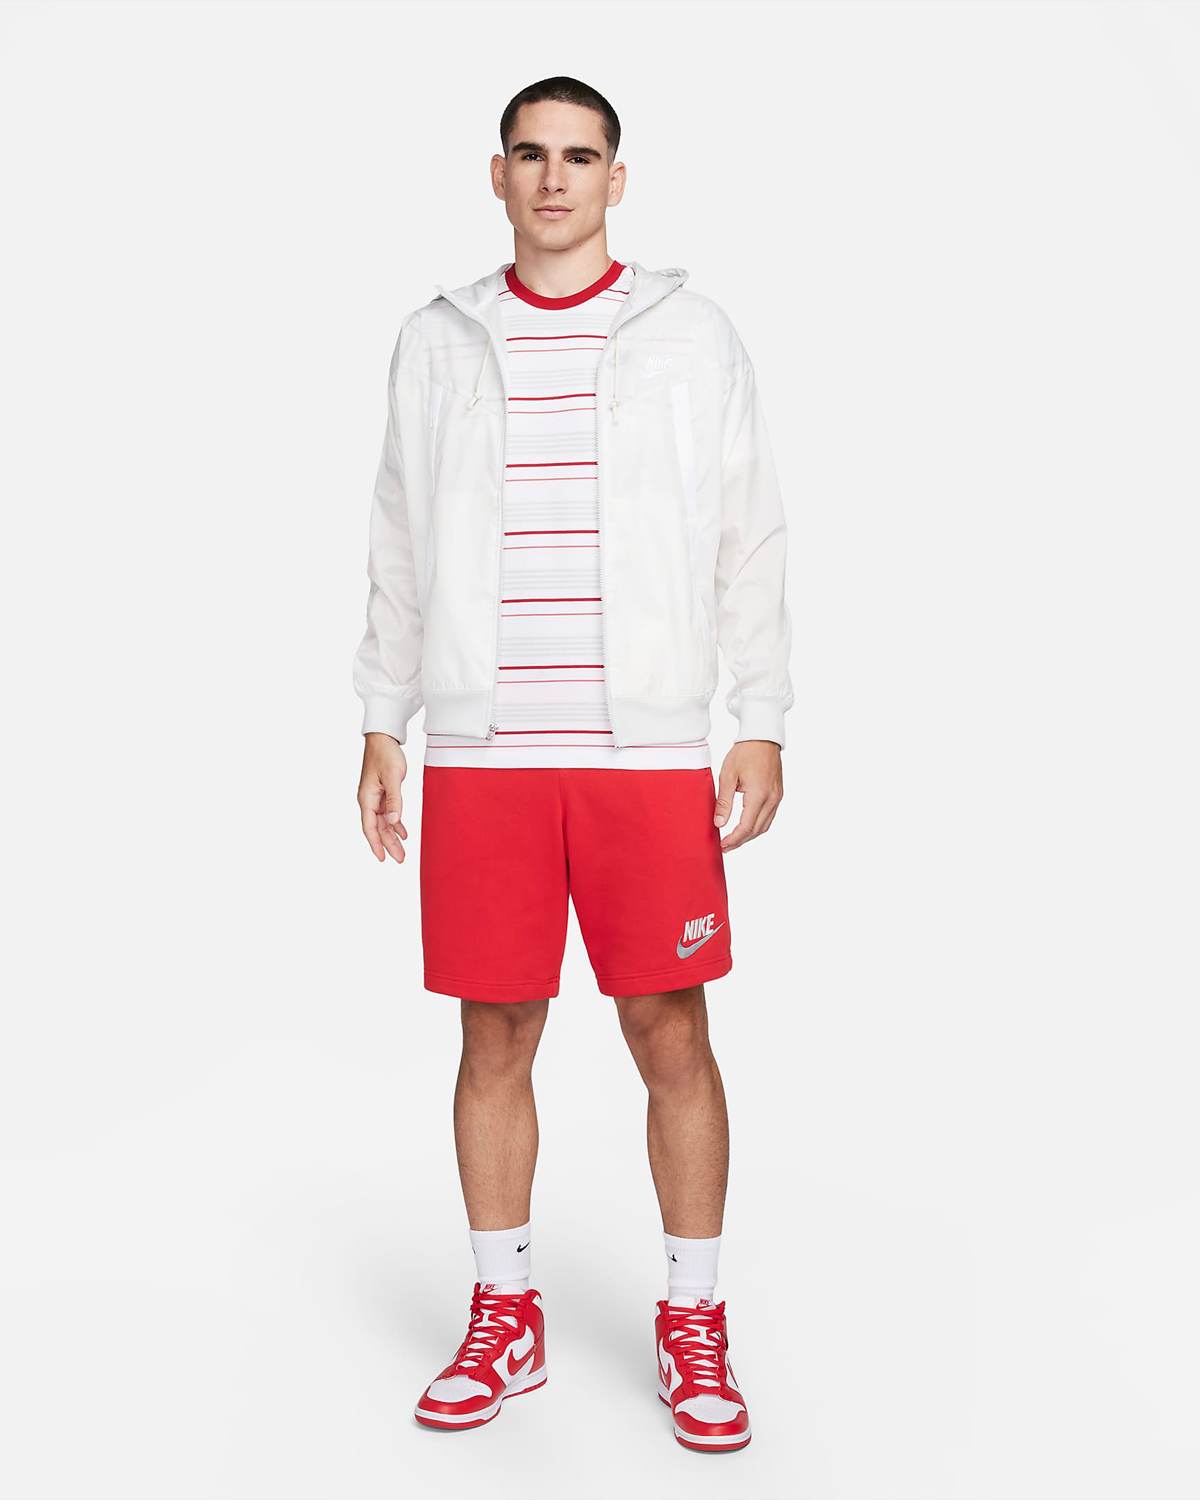 Nike-Sportswear-Striped-T-Shirt-White-University-Red-Outfit